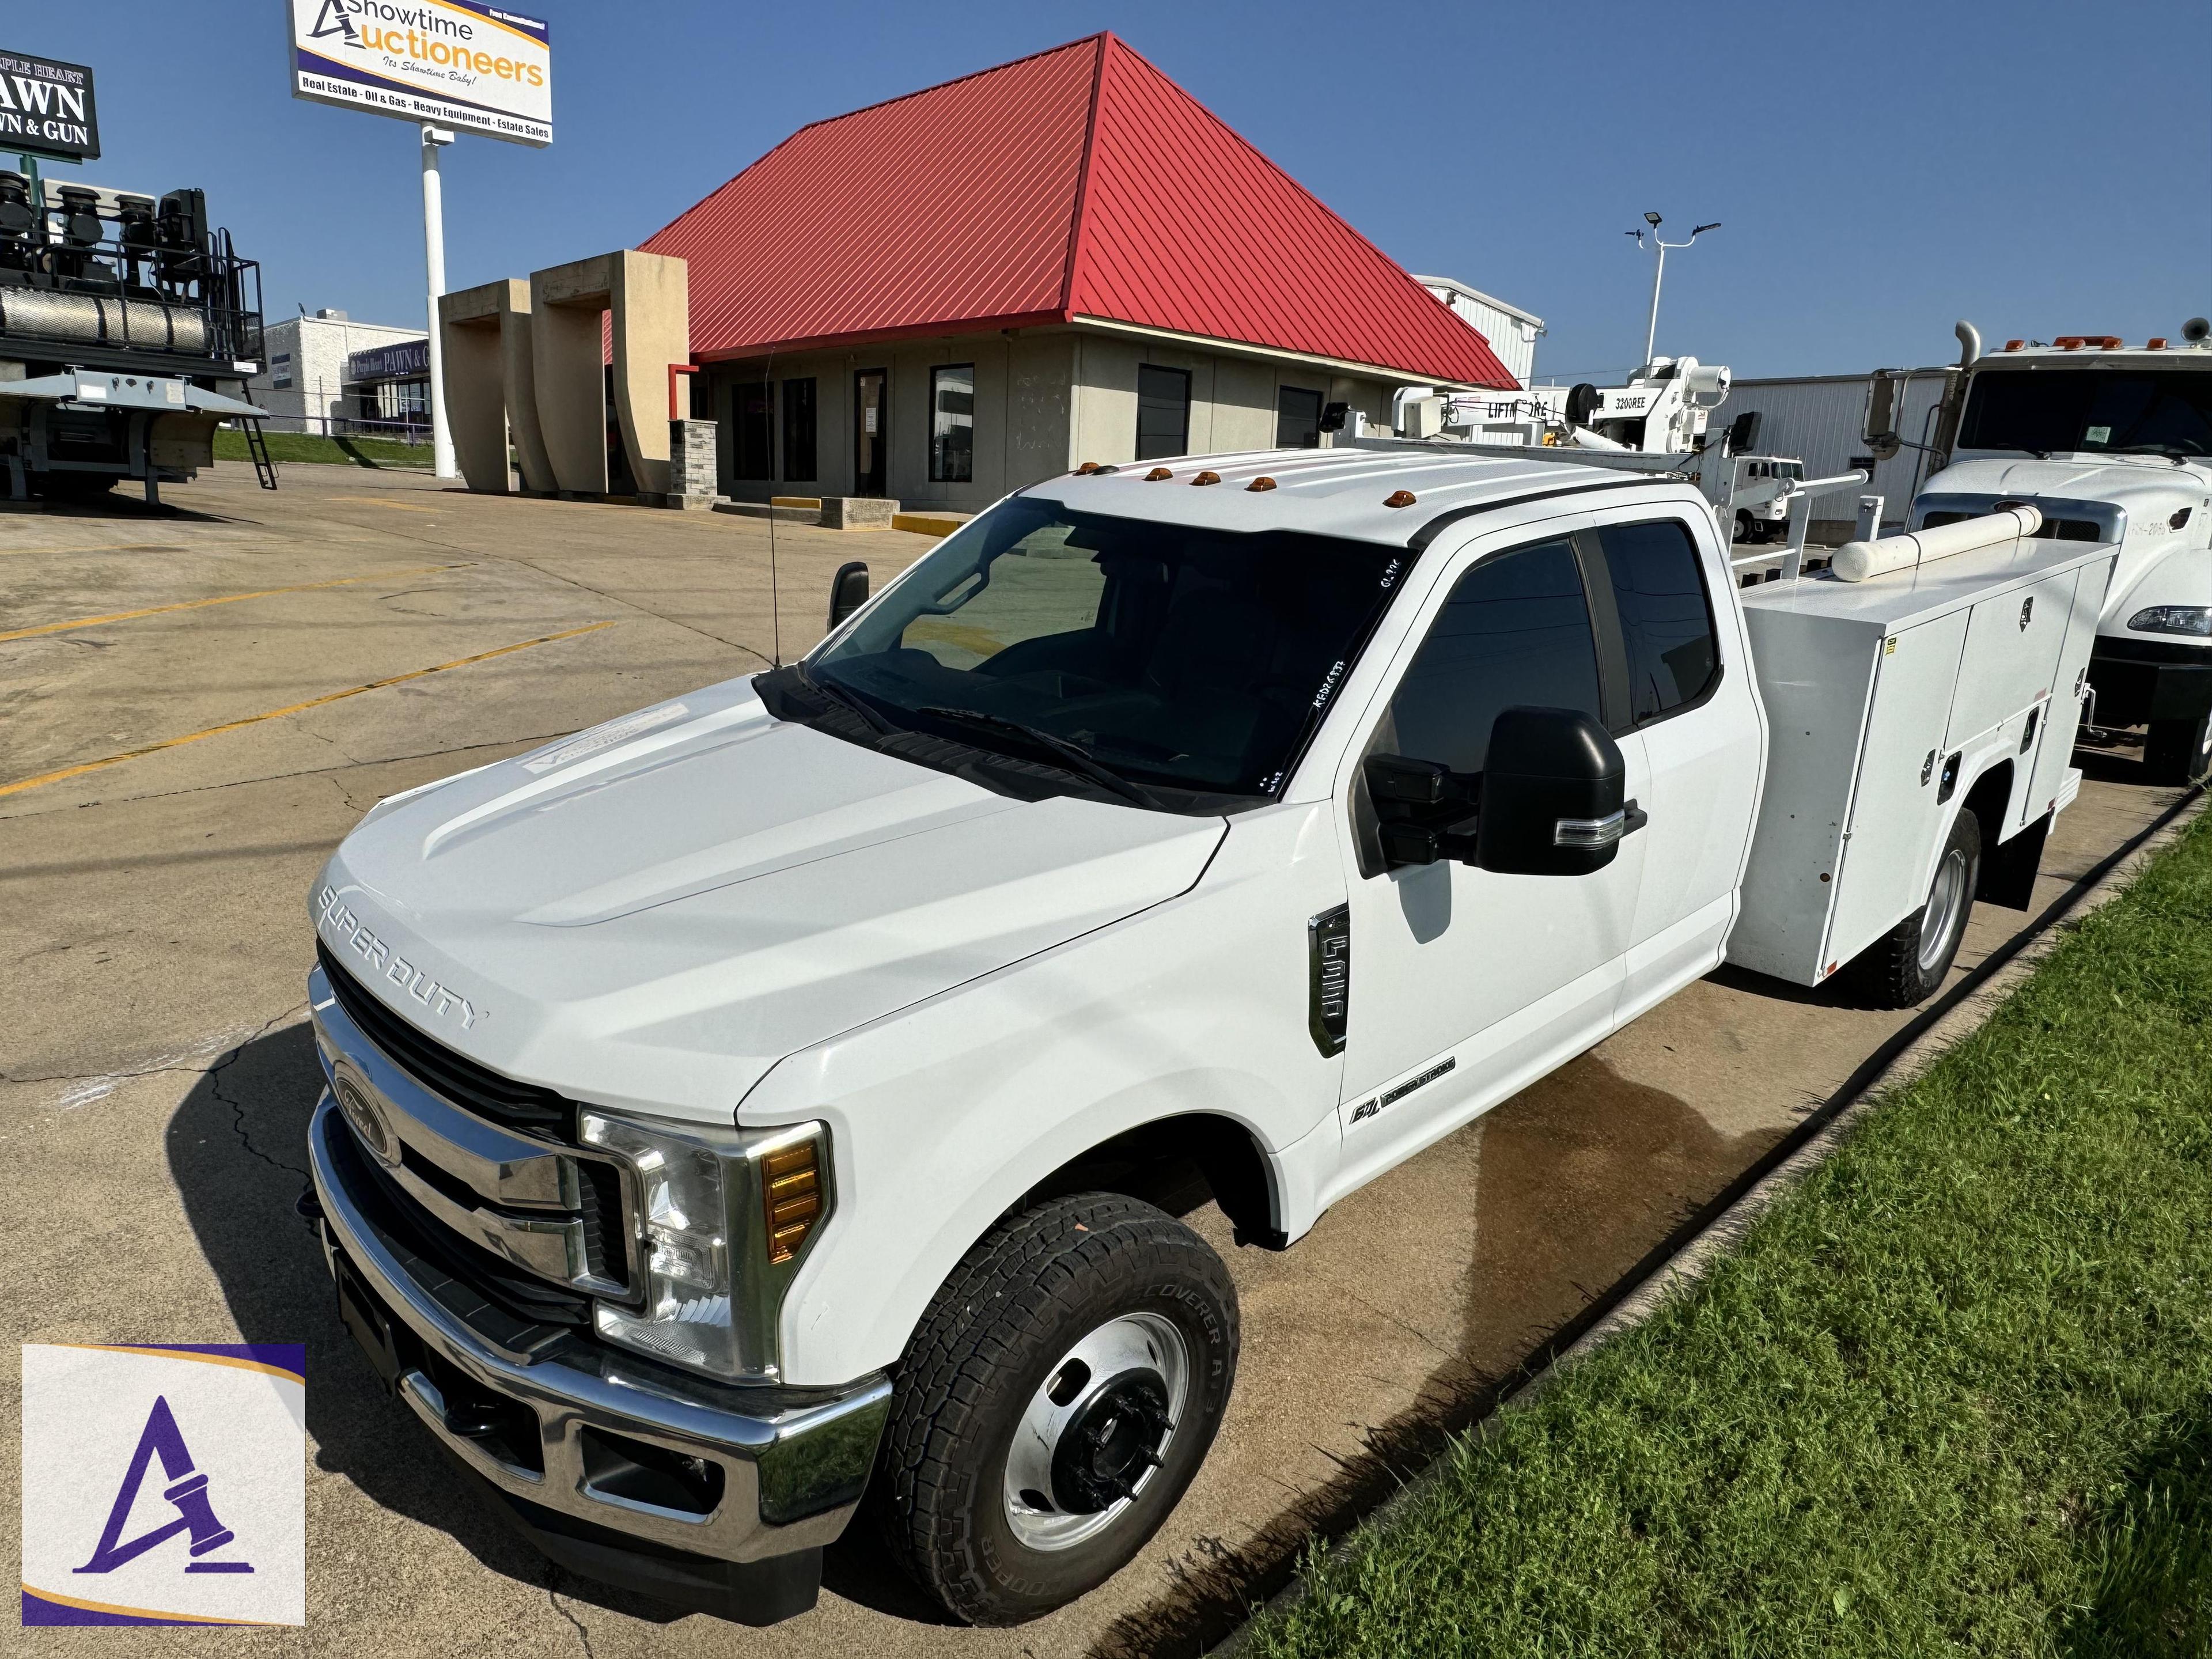 2019 Ford F350 Service Truck - Liftmoore 3200REE Crane - ONLY 61,998 MILES!